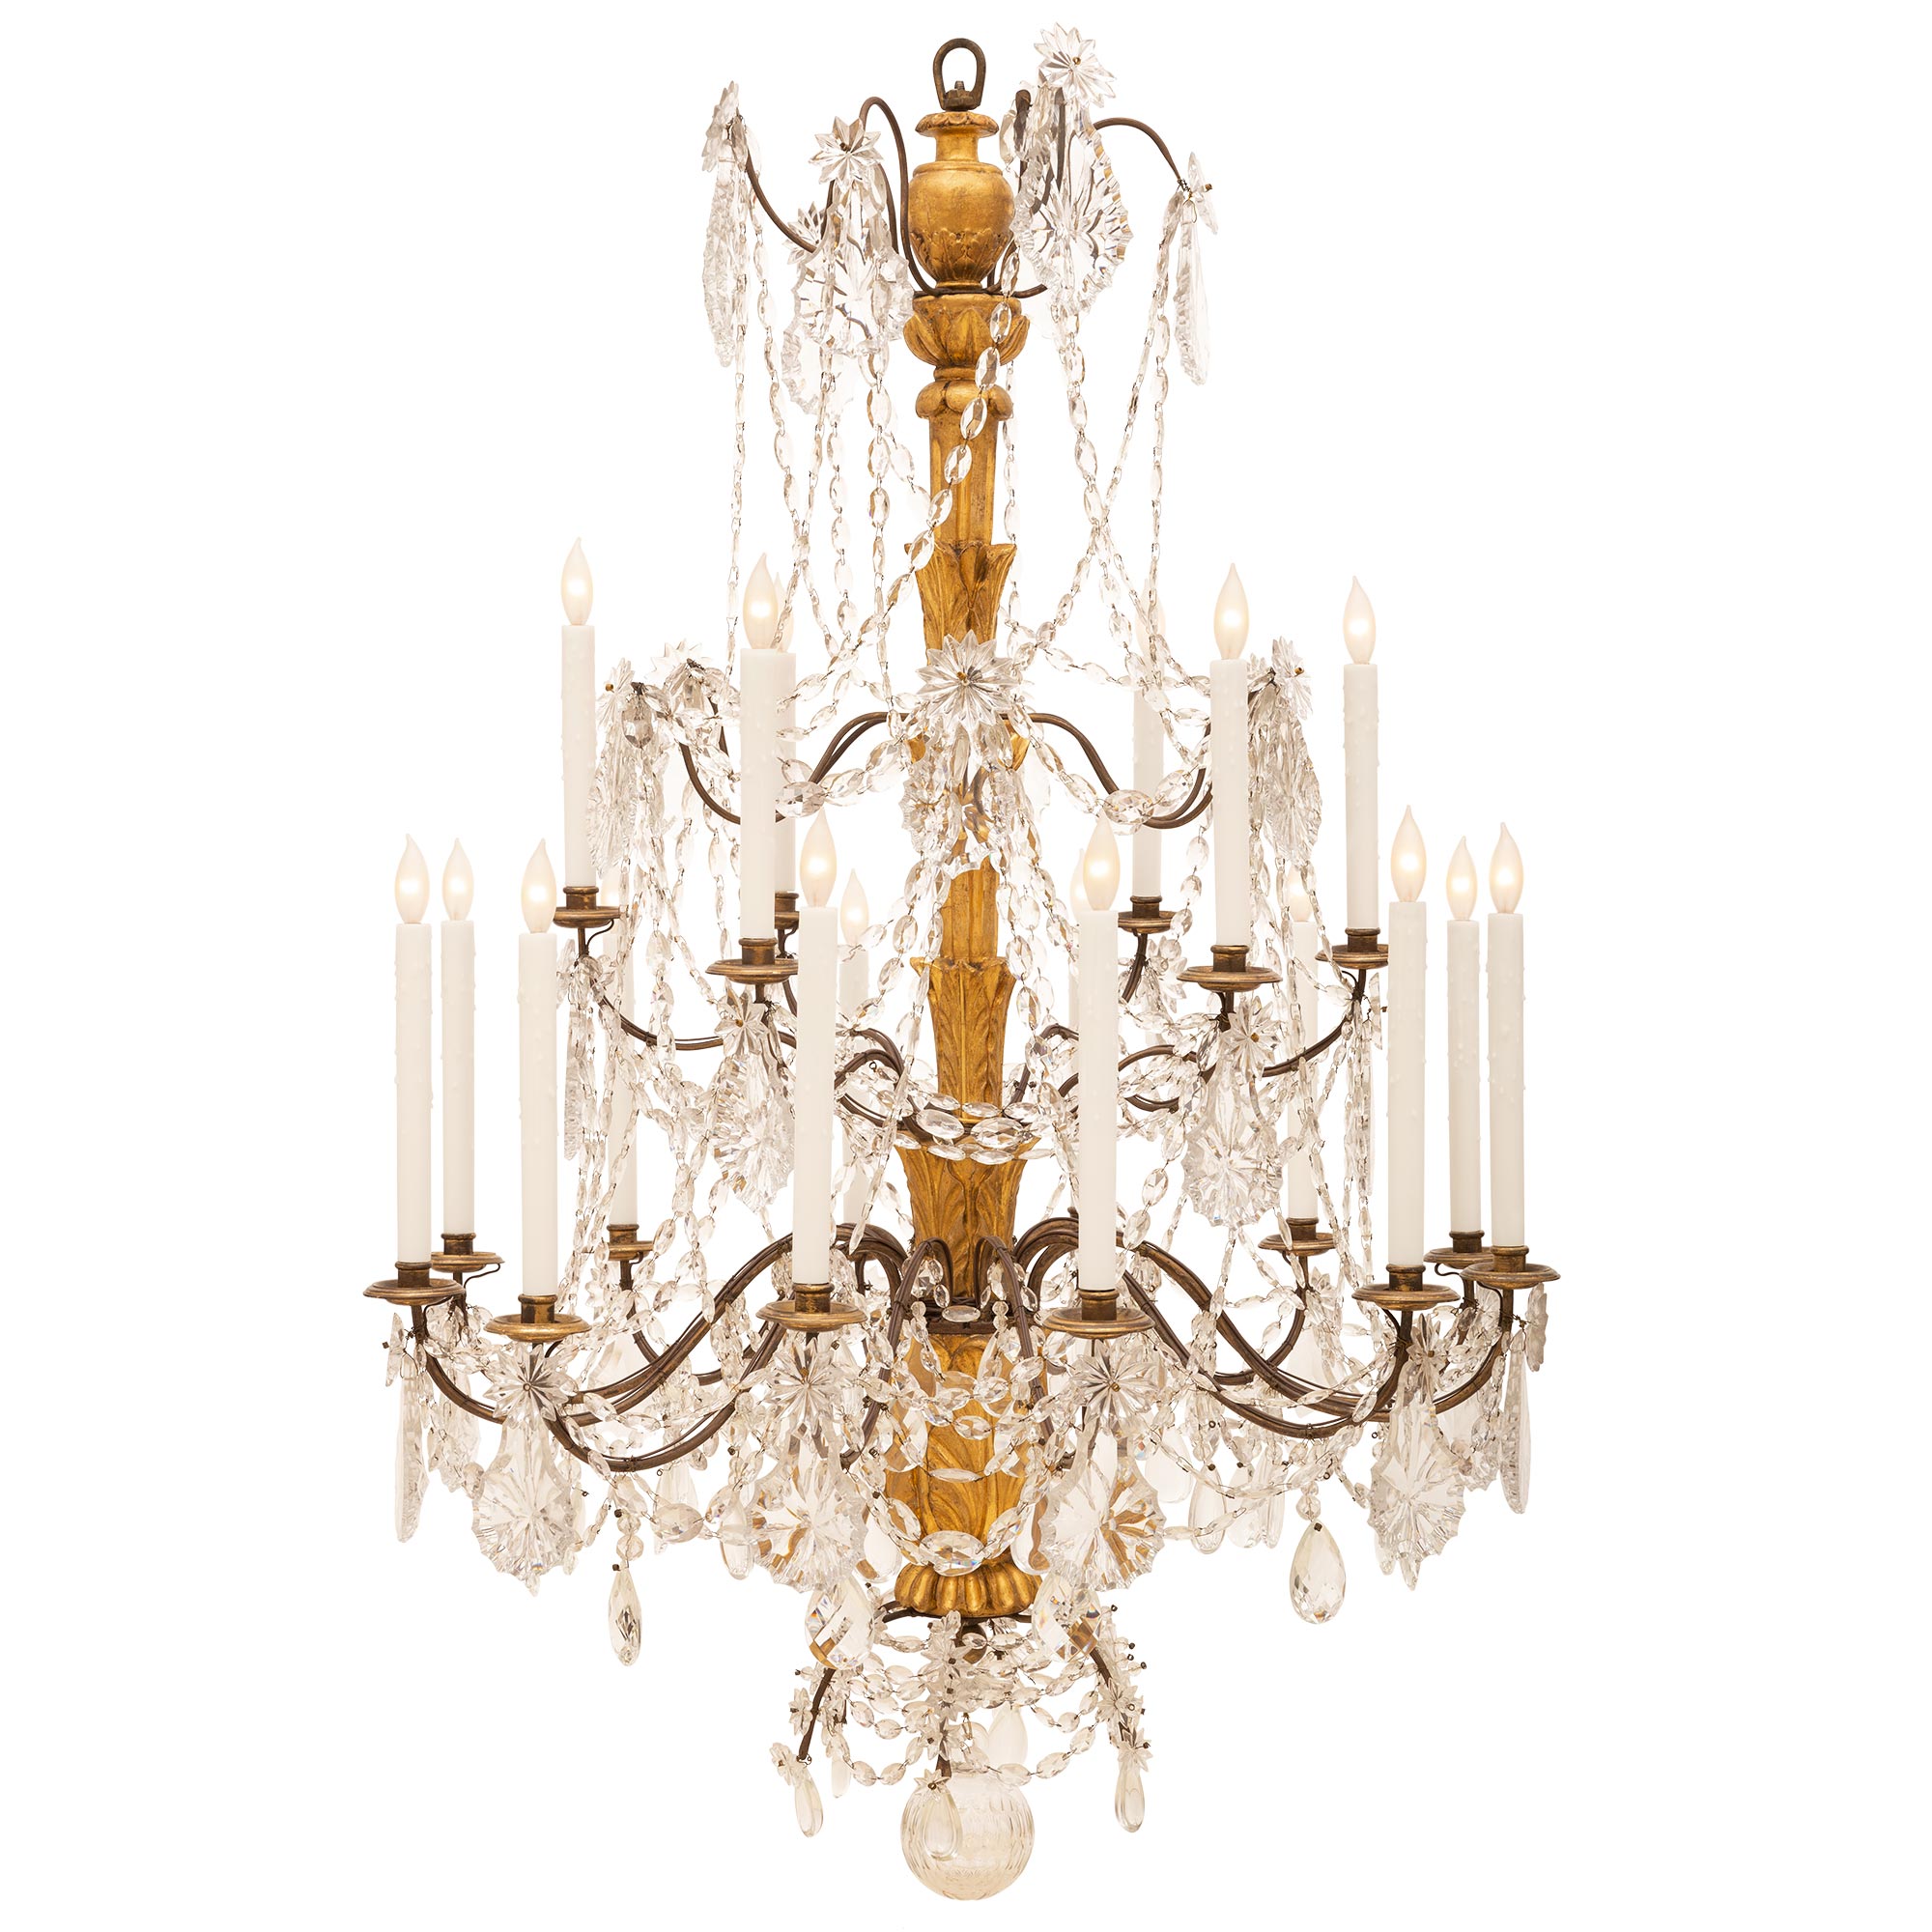 Italian 19th Century Eighteen-Light Giltwood and Crystal Chandelier For Sale